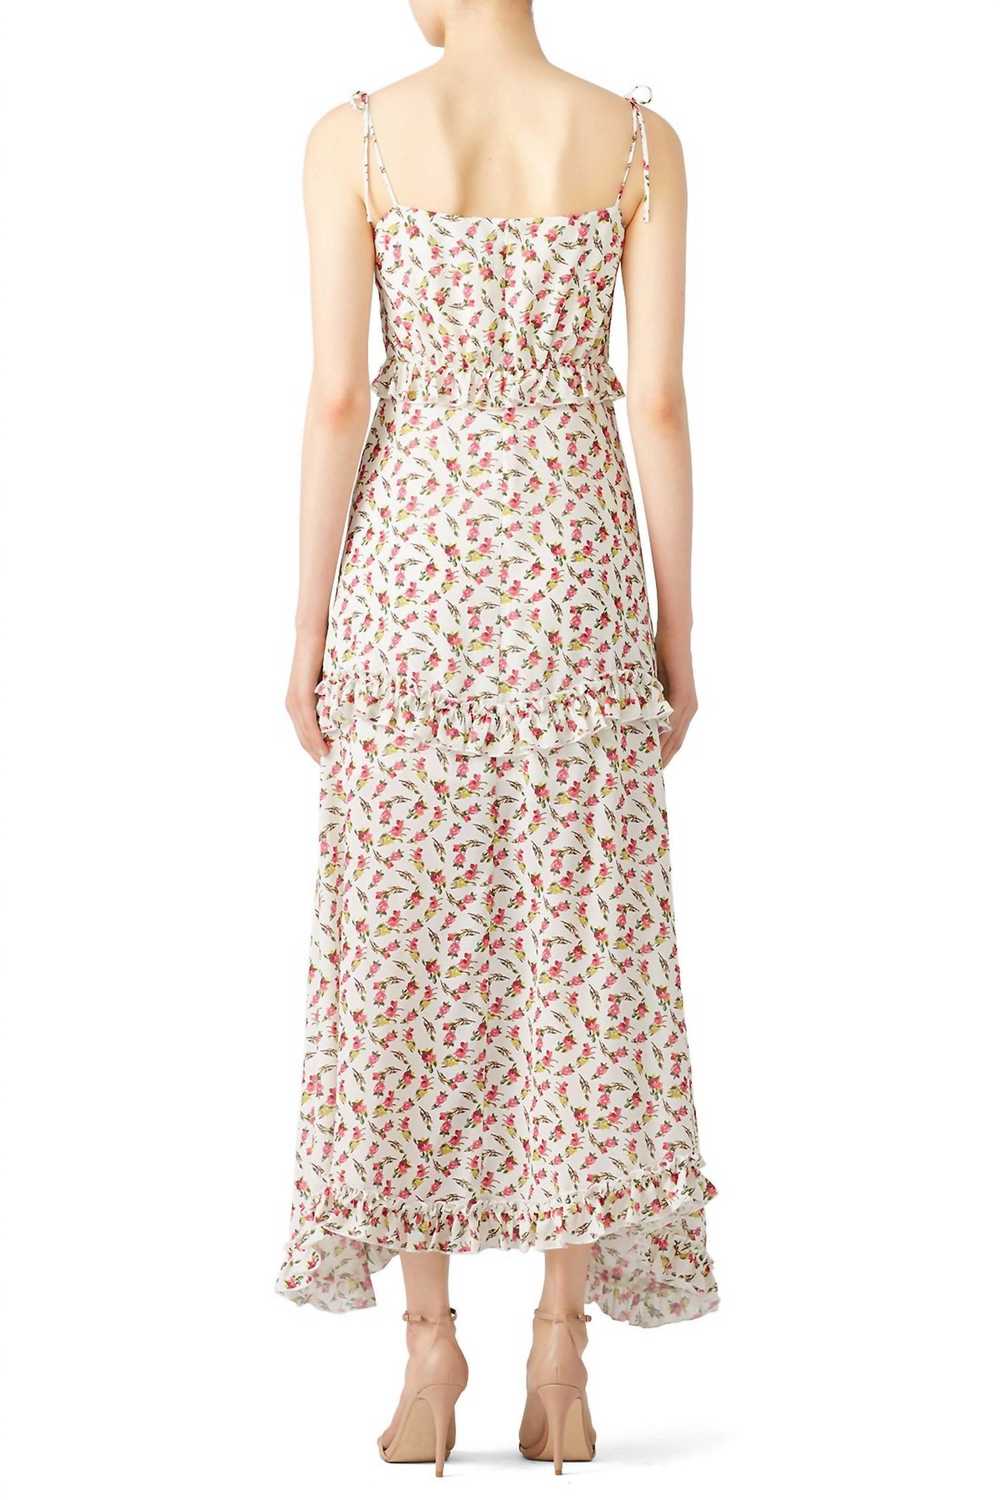 Slate & Willow pre-loved ivory rose floral maxi d… - image 3